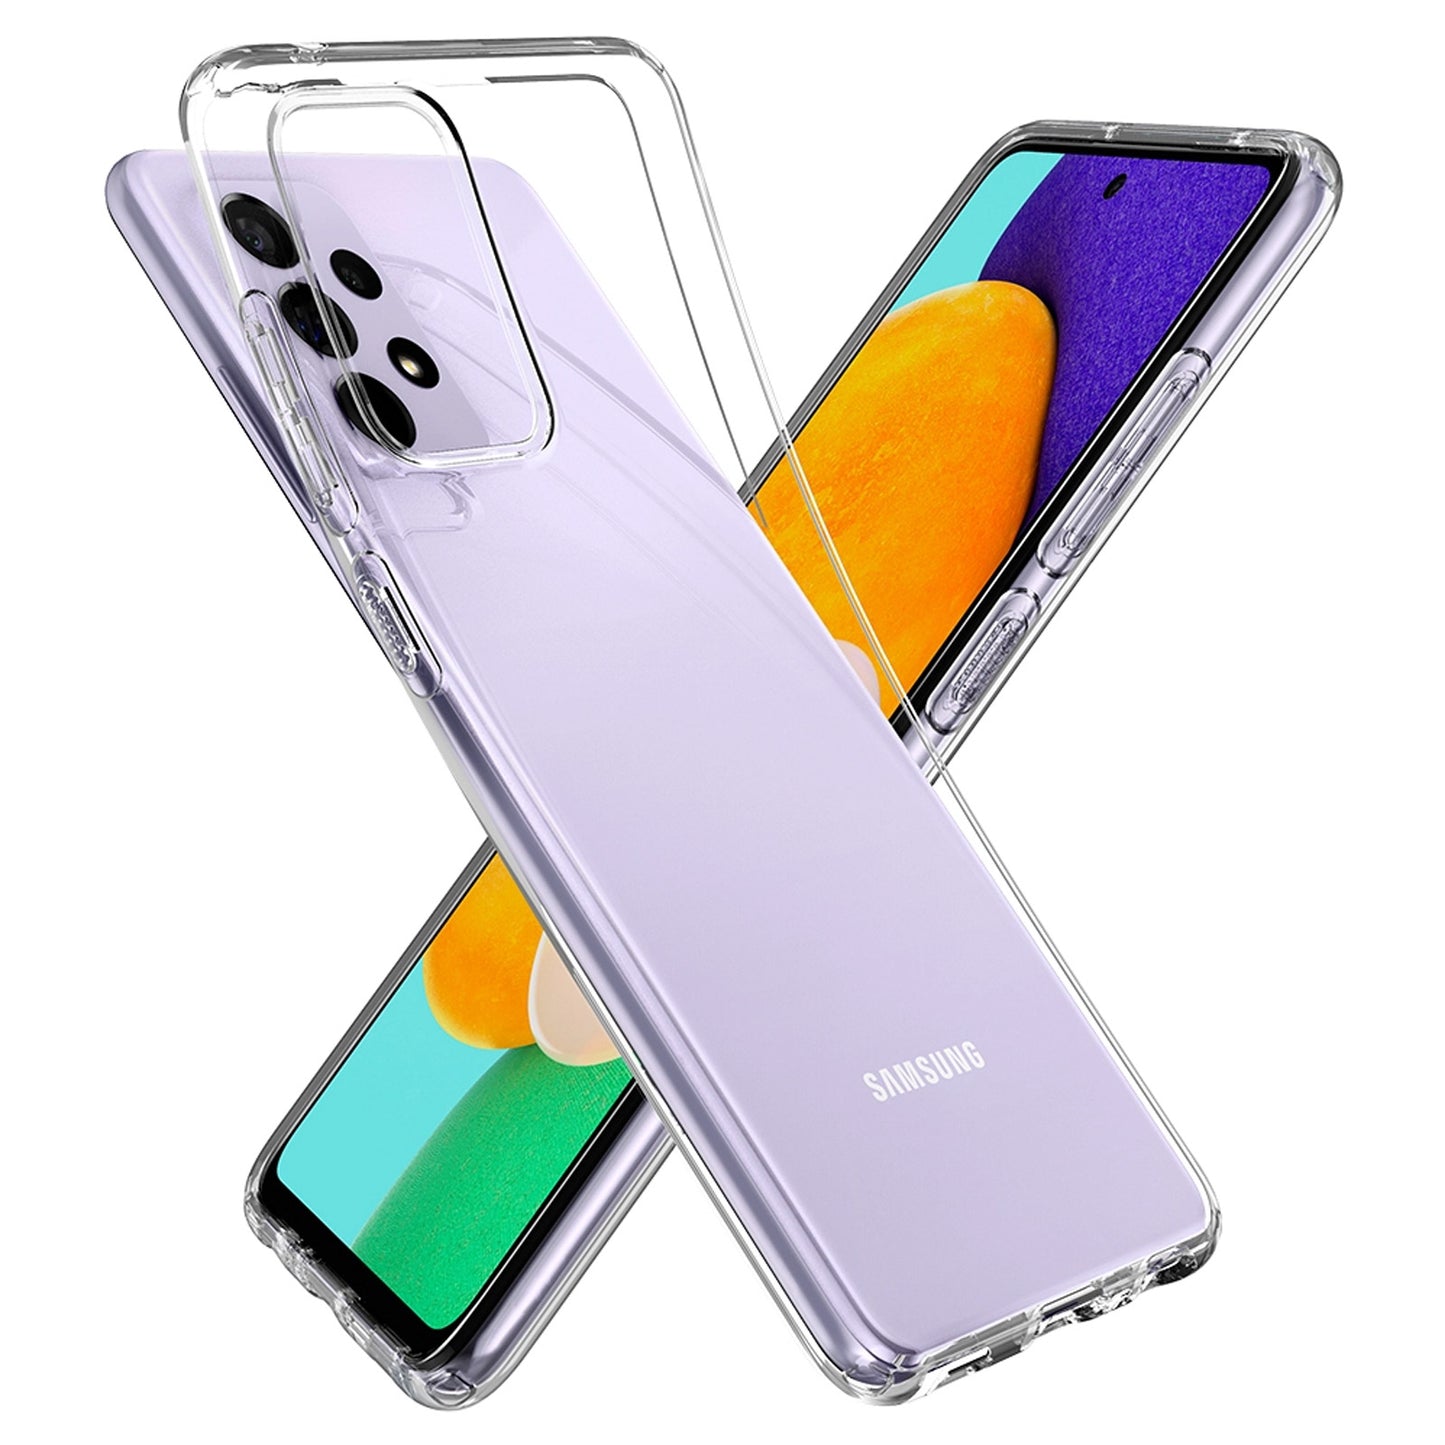 MEZON Galaxy A52 5G Ultra Slim Crystal Clear Premium TPU Gel Back Case – Shock Absorption, Wireless Charging Compatible